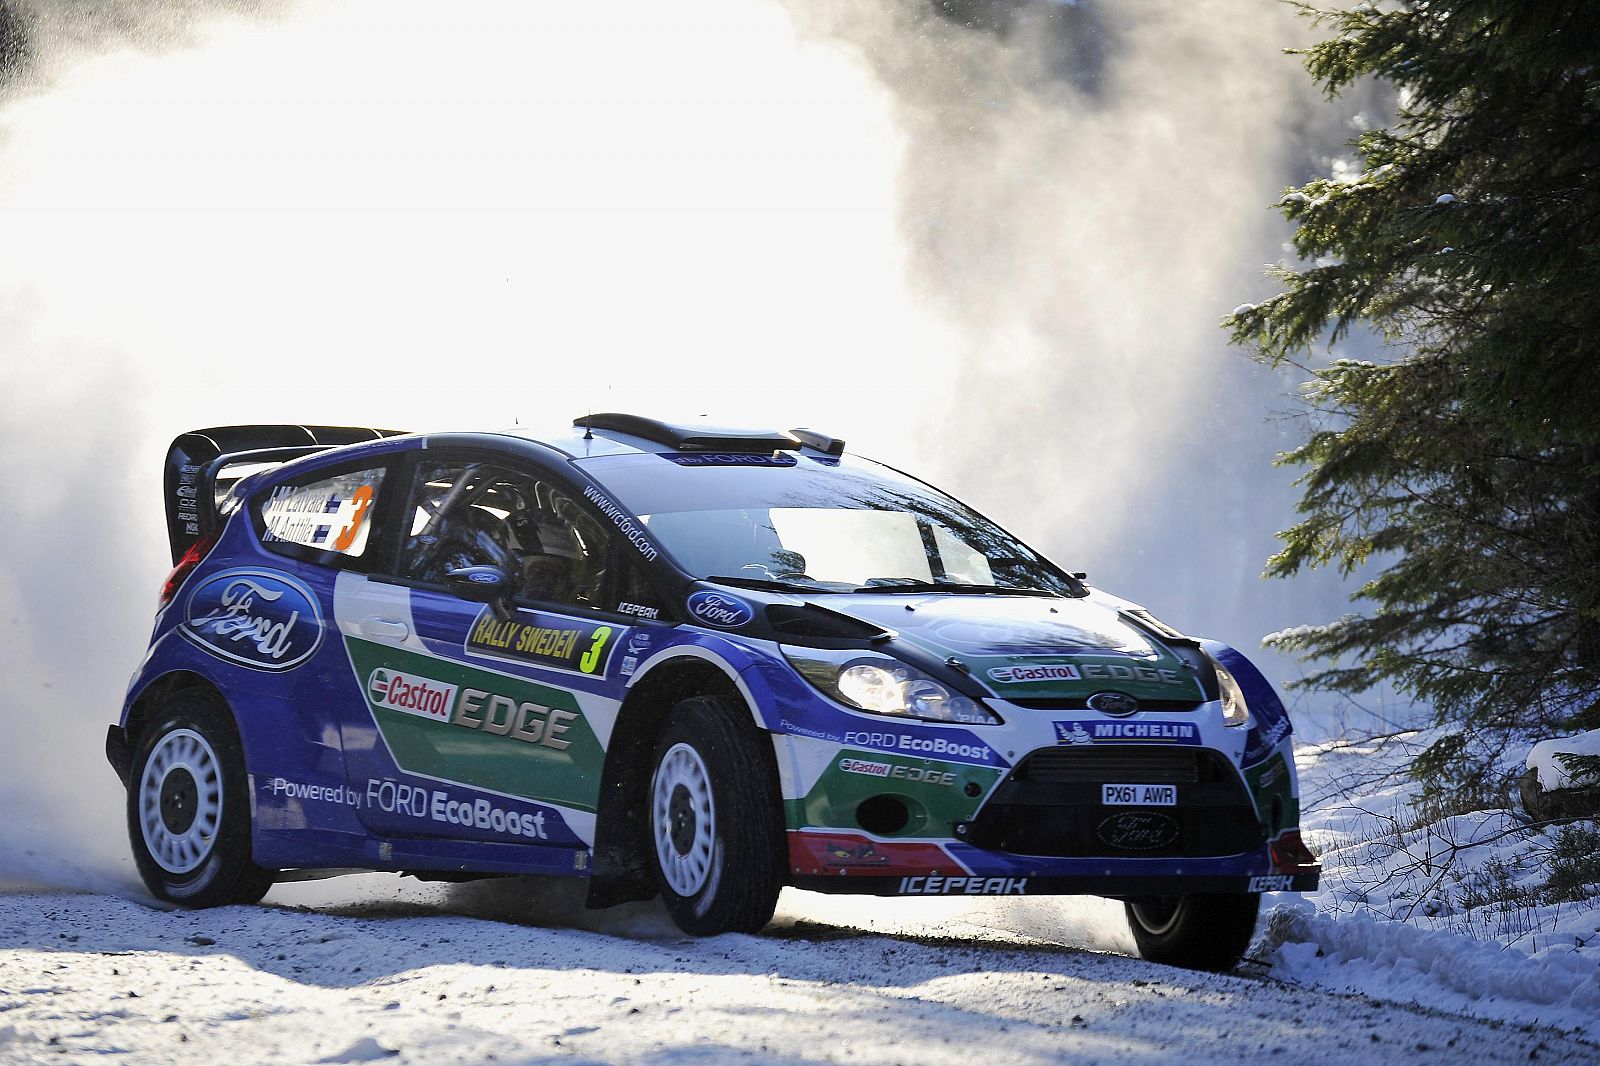 Finland's Latvala drives his Ford Fiesta WRC during the qualification for the World Rally Championship Rally Sweden in Hagfors